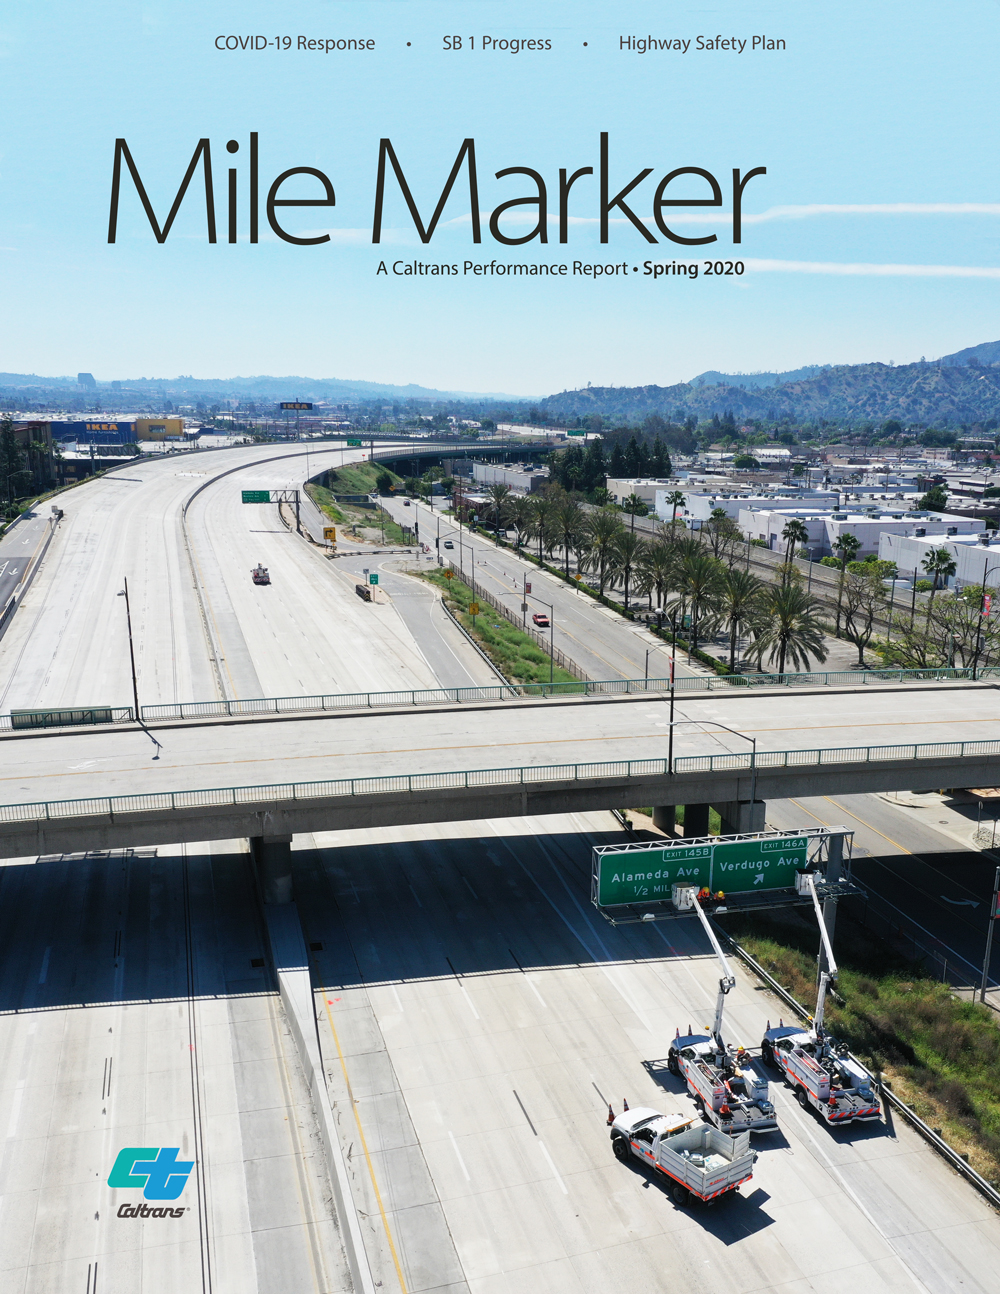 Image of the Mile Marker Spring 2020 Cover, showing Caltrans crews maintaining an overhanging sign on the freeway in southern California